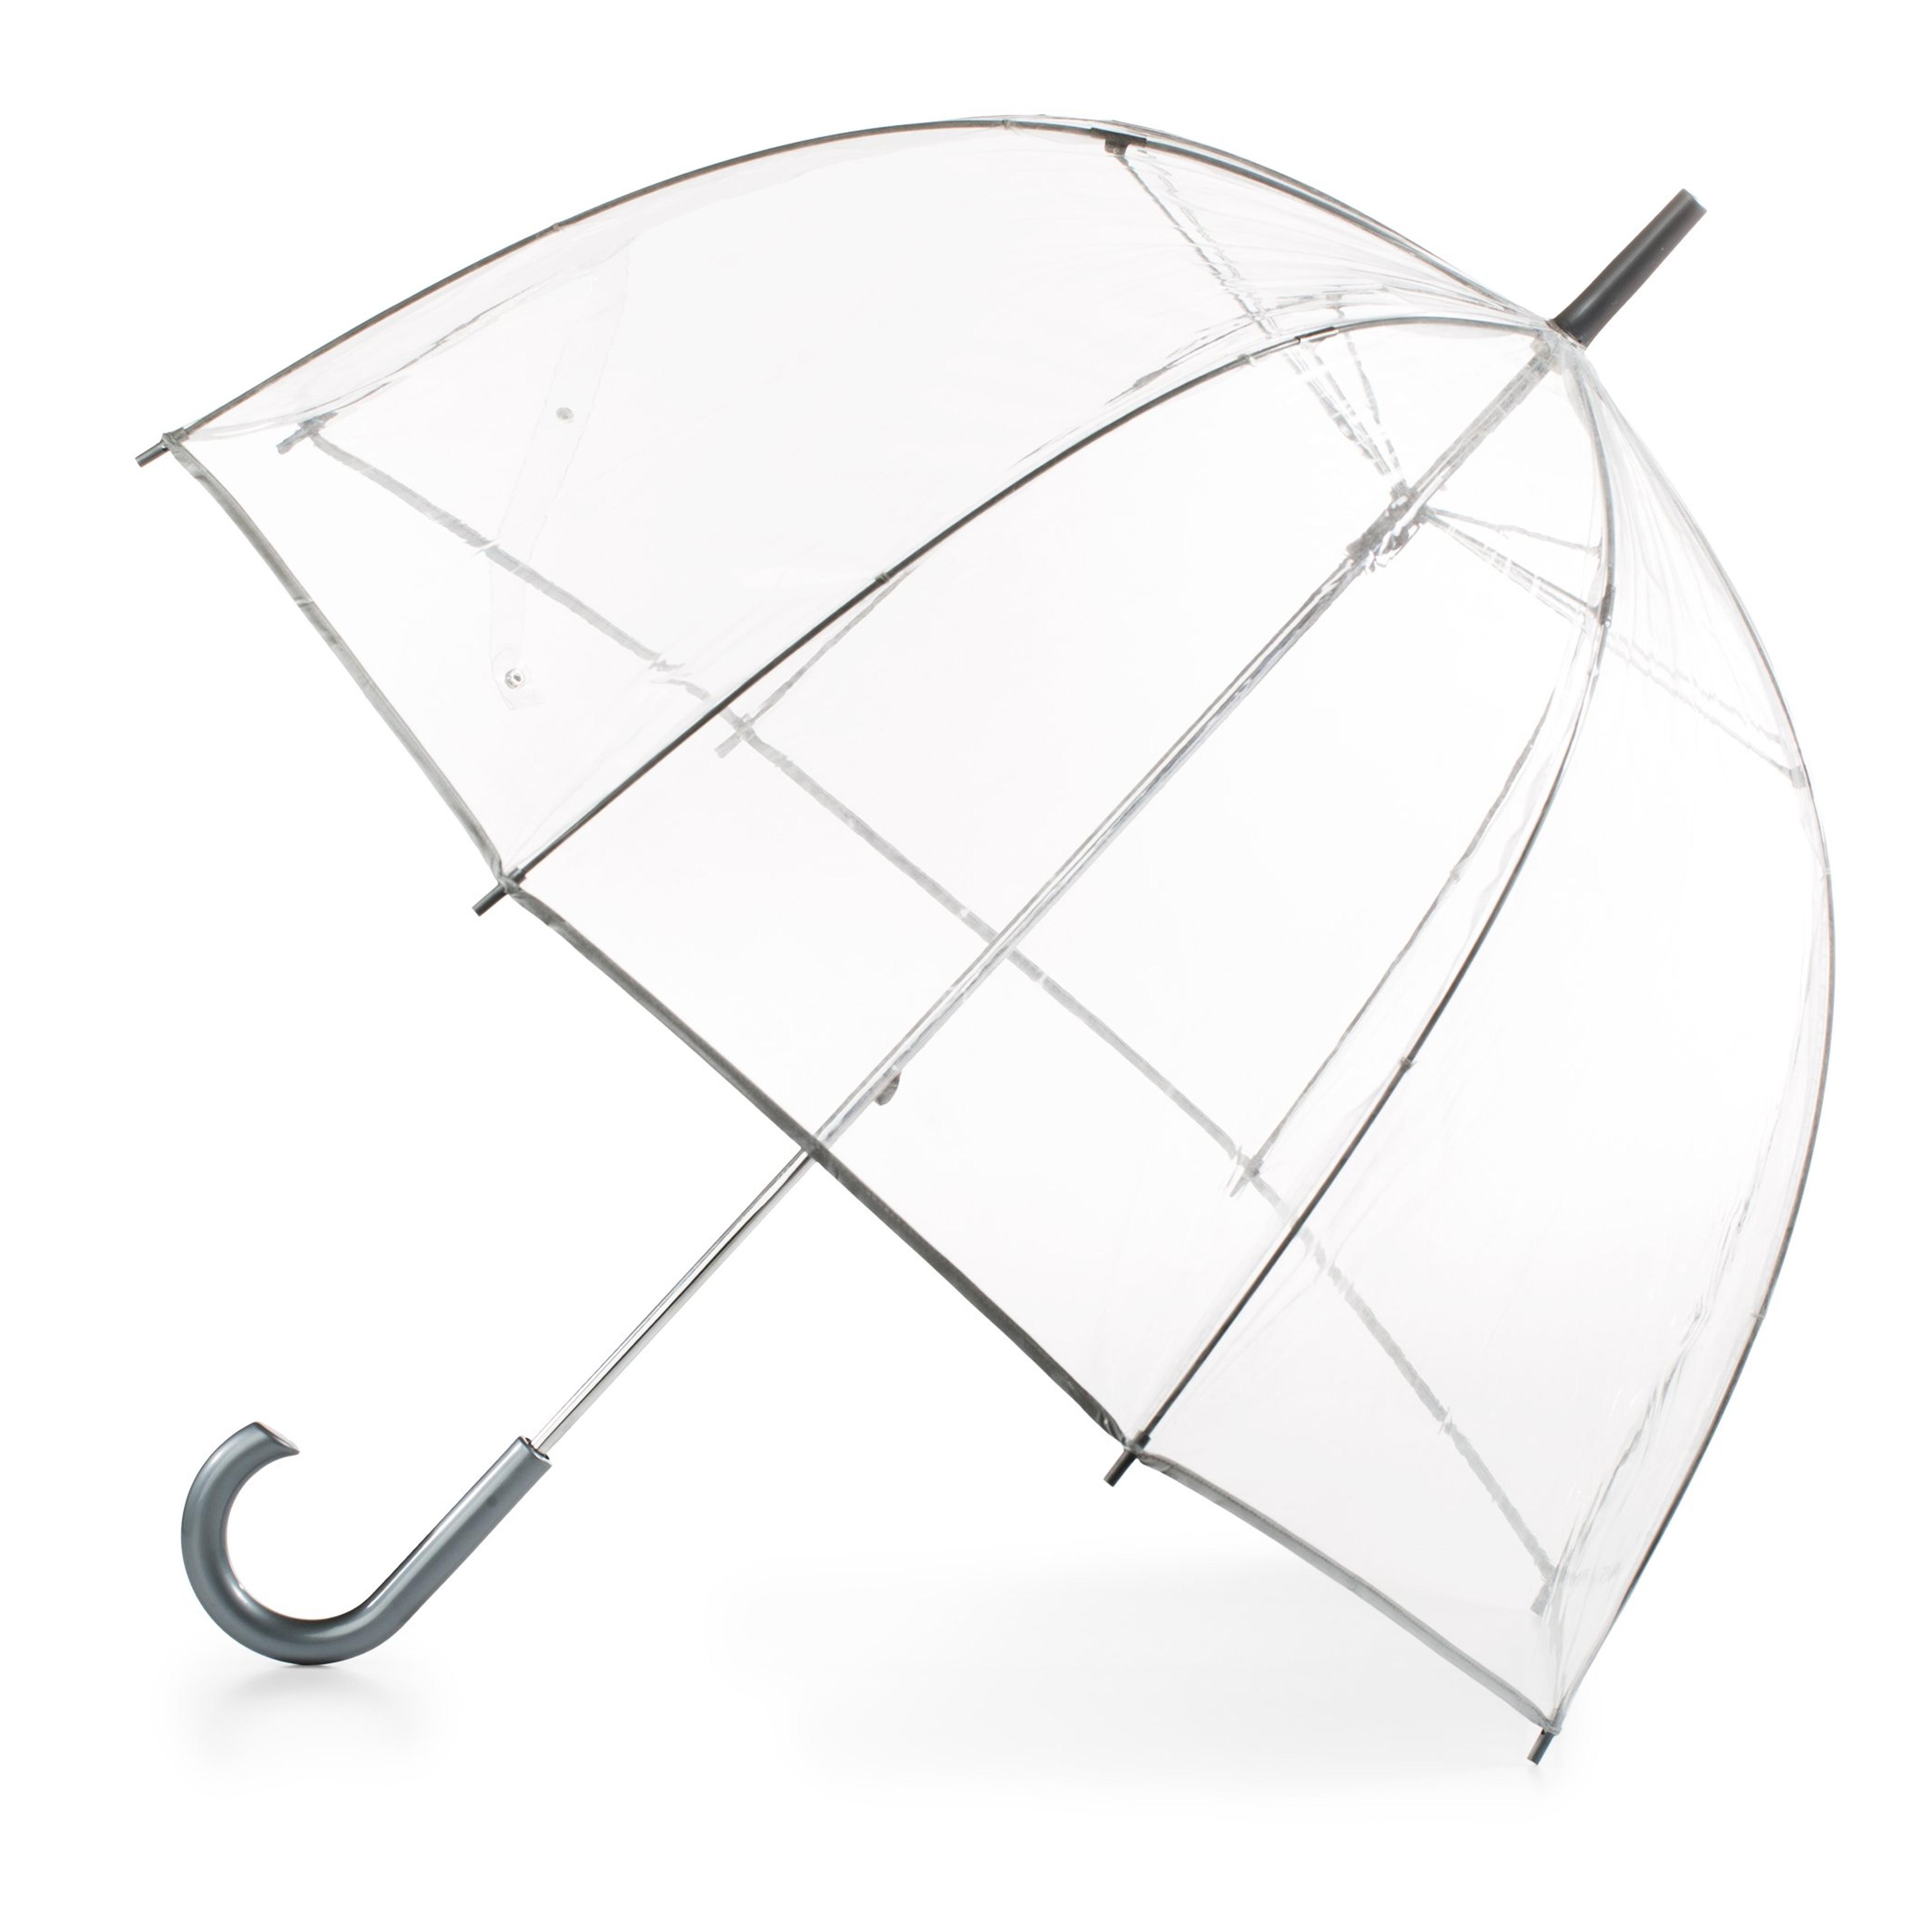 Amazon.com: totes Women's Clear Bubble Umbrella : Clothing, Shoes & Jewelry